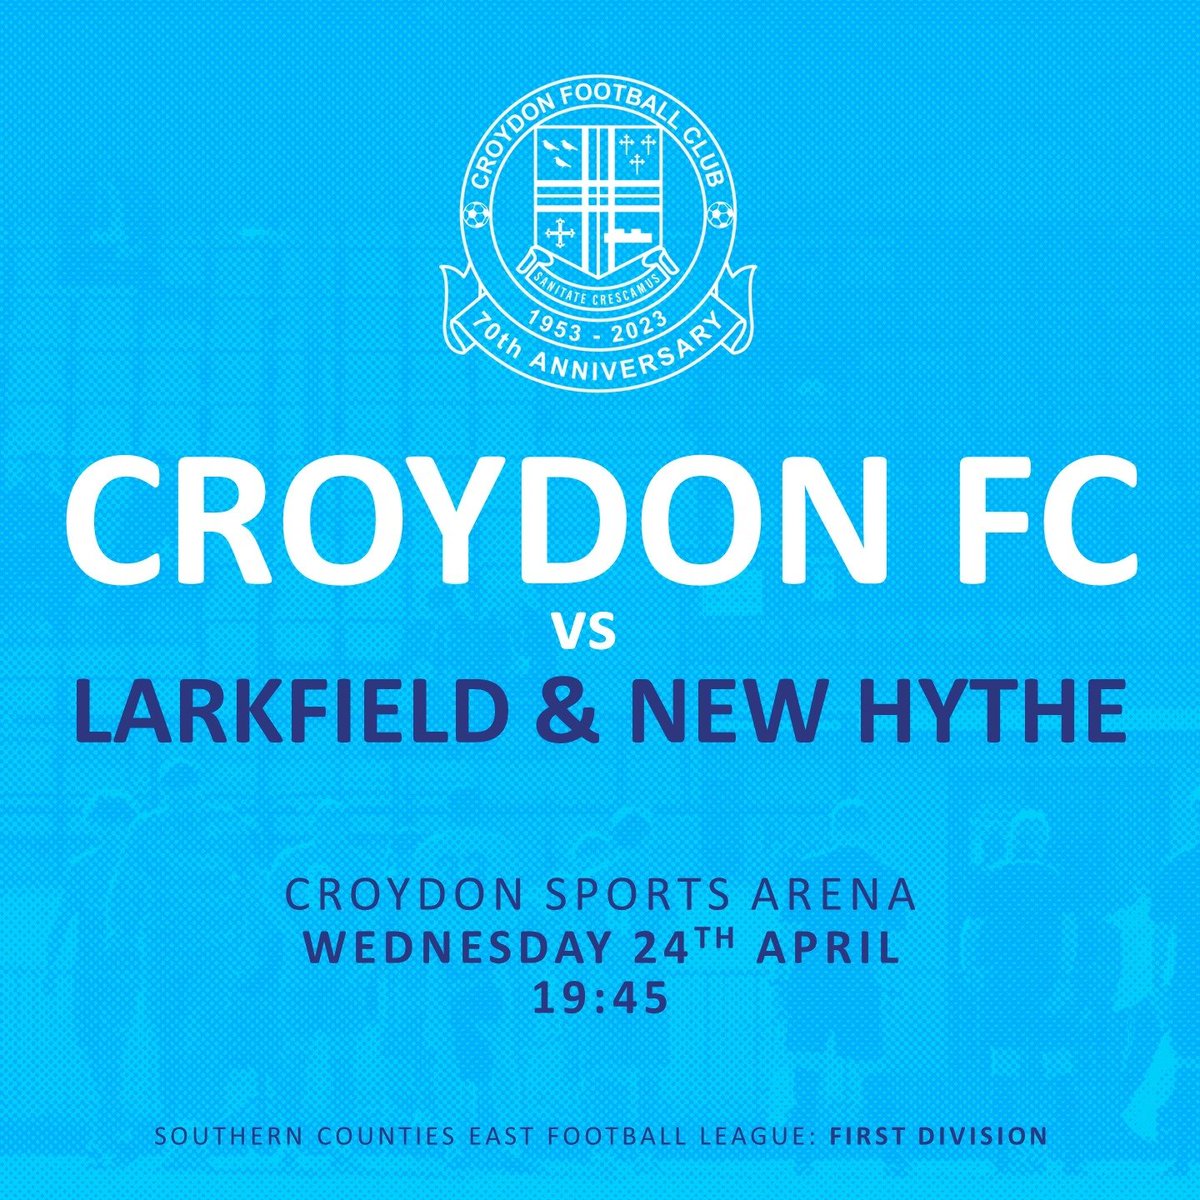 Tonight @Croydon_FC play the last home game of the season and @LNHFC1961 are the visitors. Kick off at Croydon Sports Arena is 7.45. There's a tea bar and Hillburn's Bar is open too! Come and #supportyourlocalteam #CFC  #comeonyoutrams #nonleague #football #groundhop #dingding